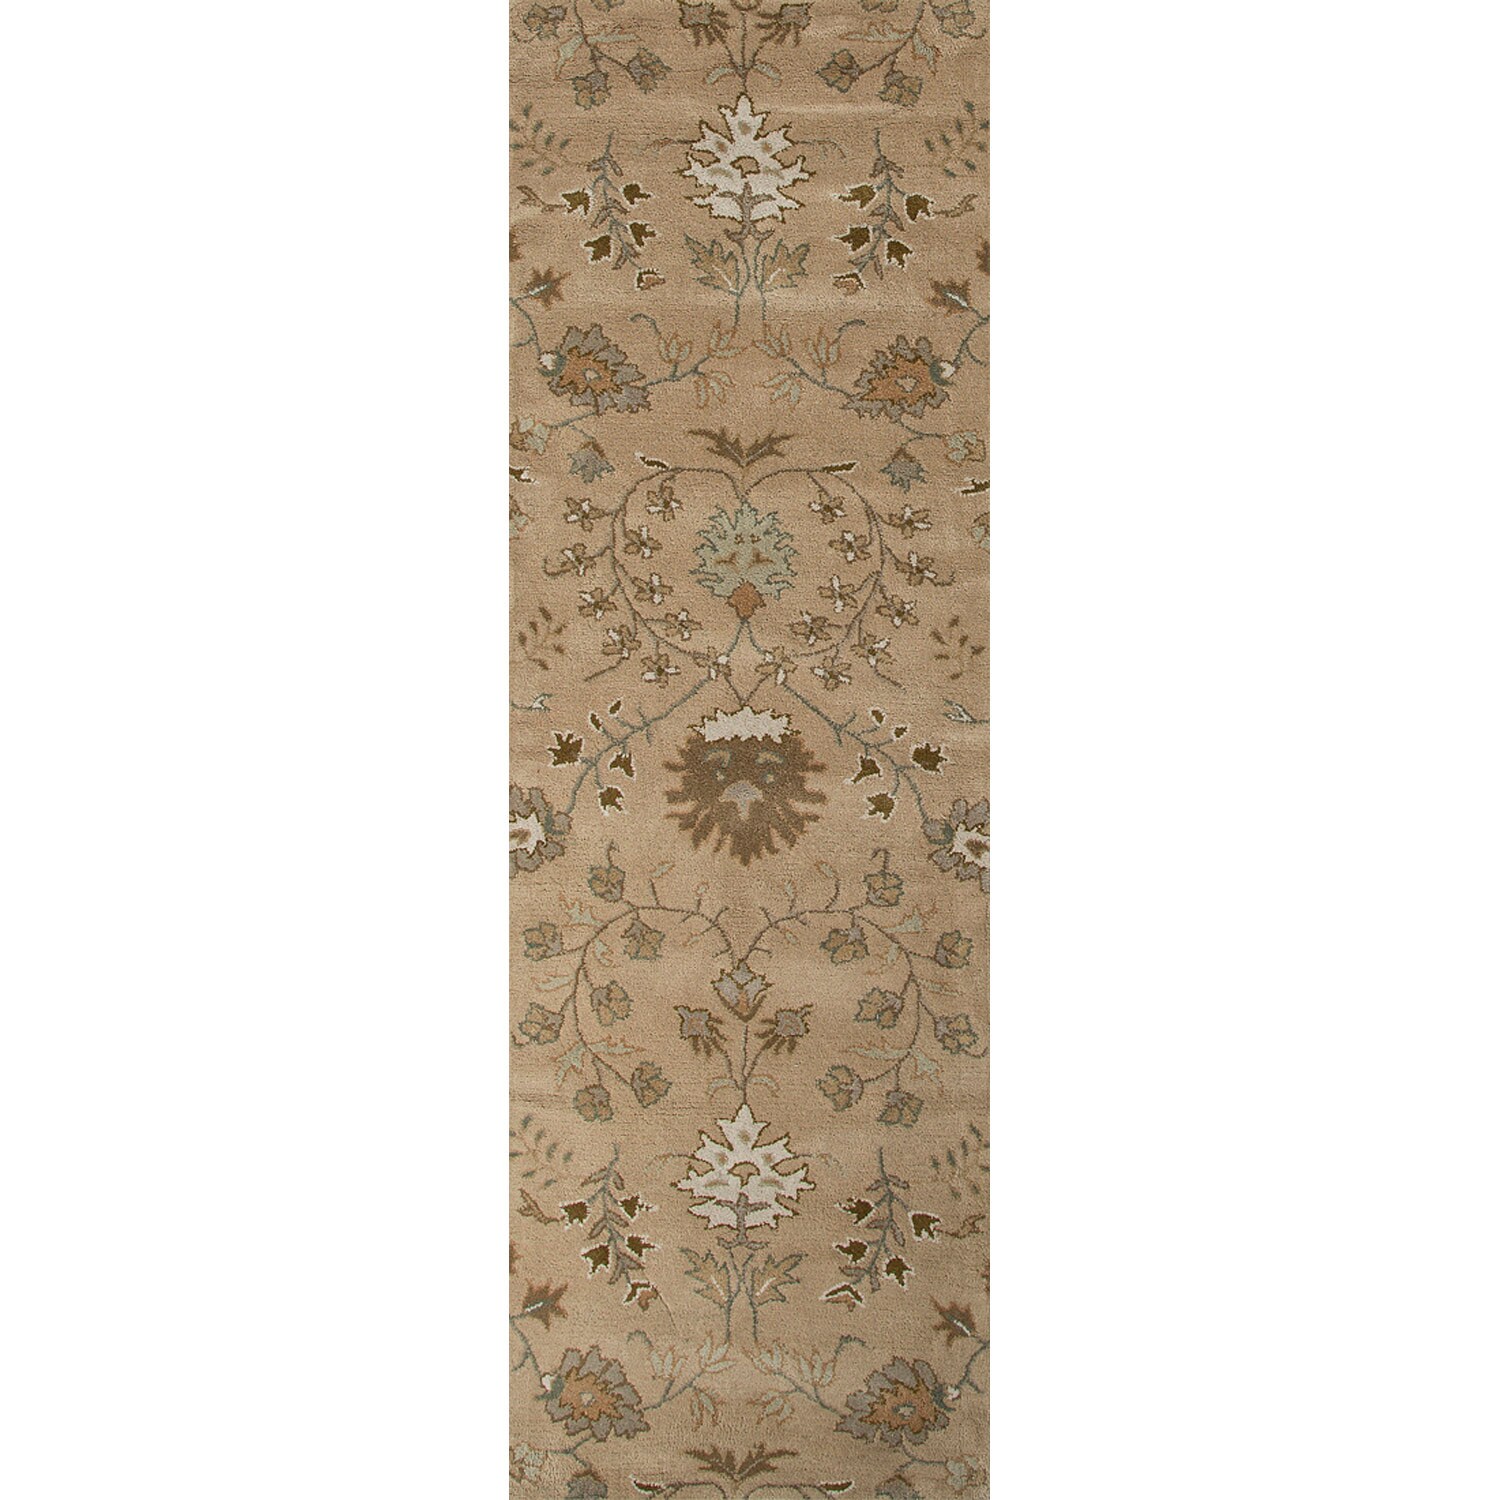 Hand tufted Transitional Floral pattern Brown Runner Rug (26 X 8)